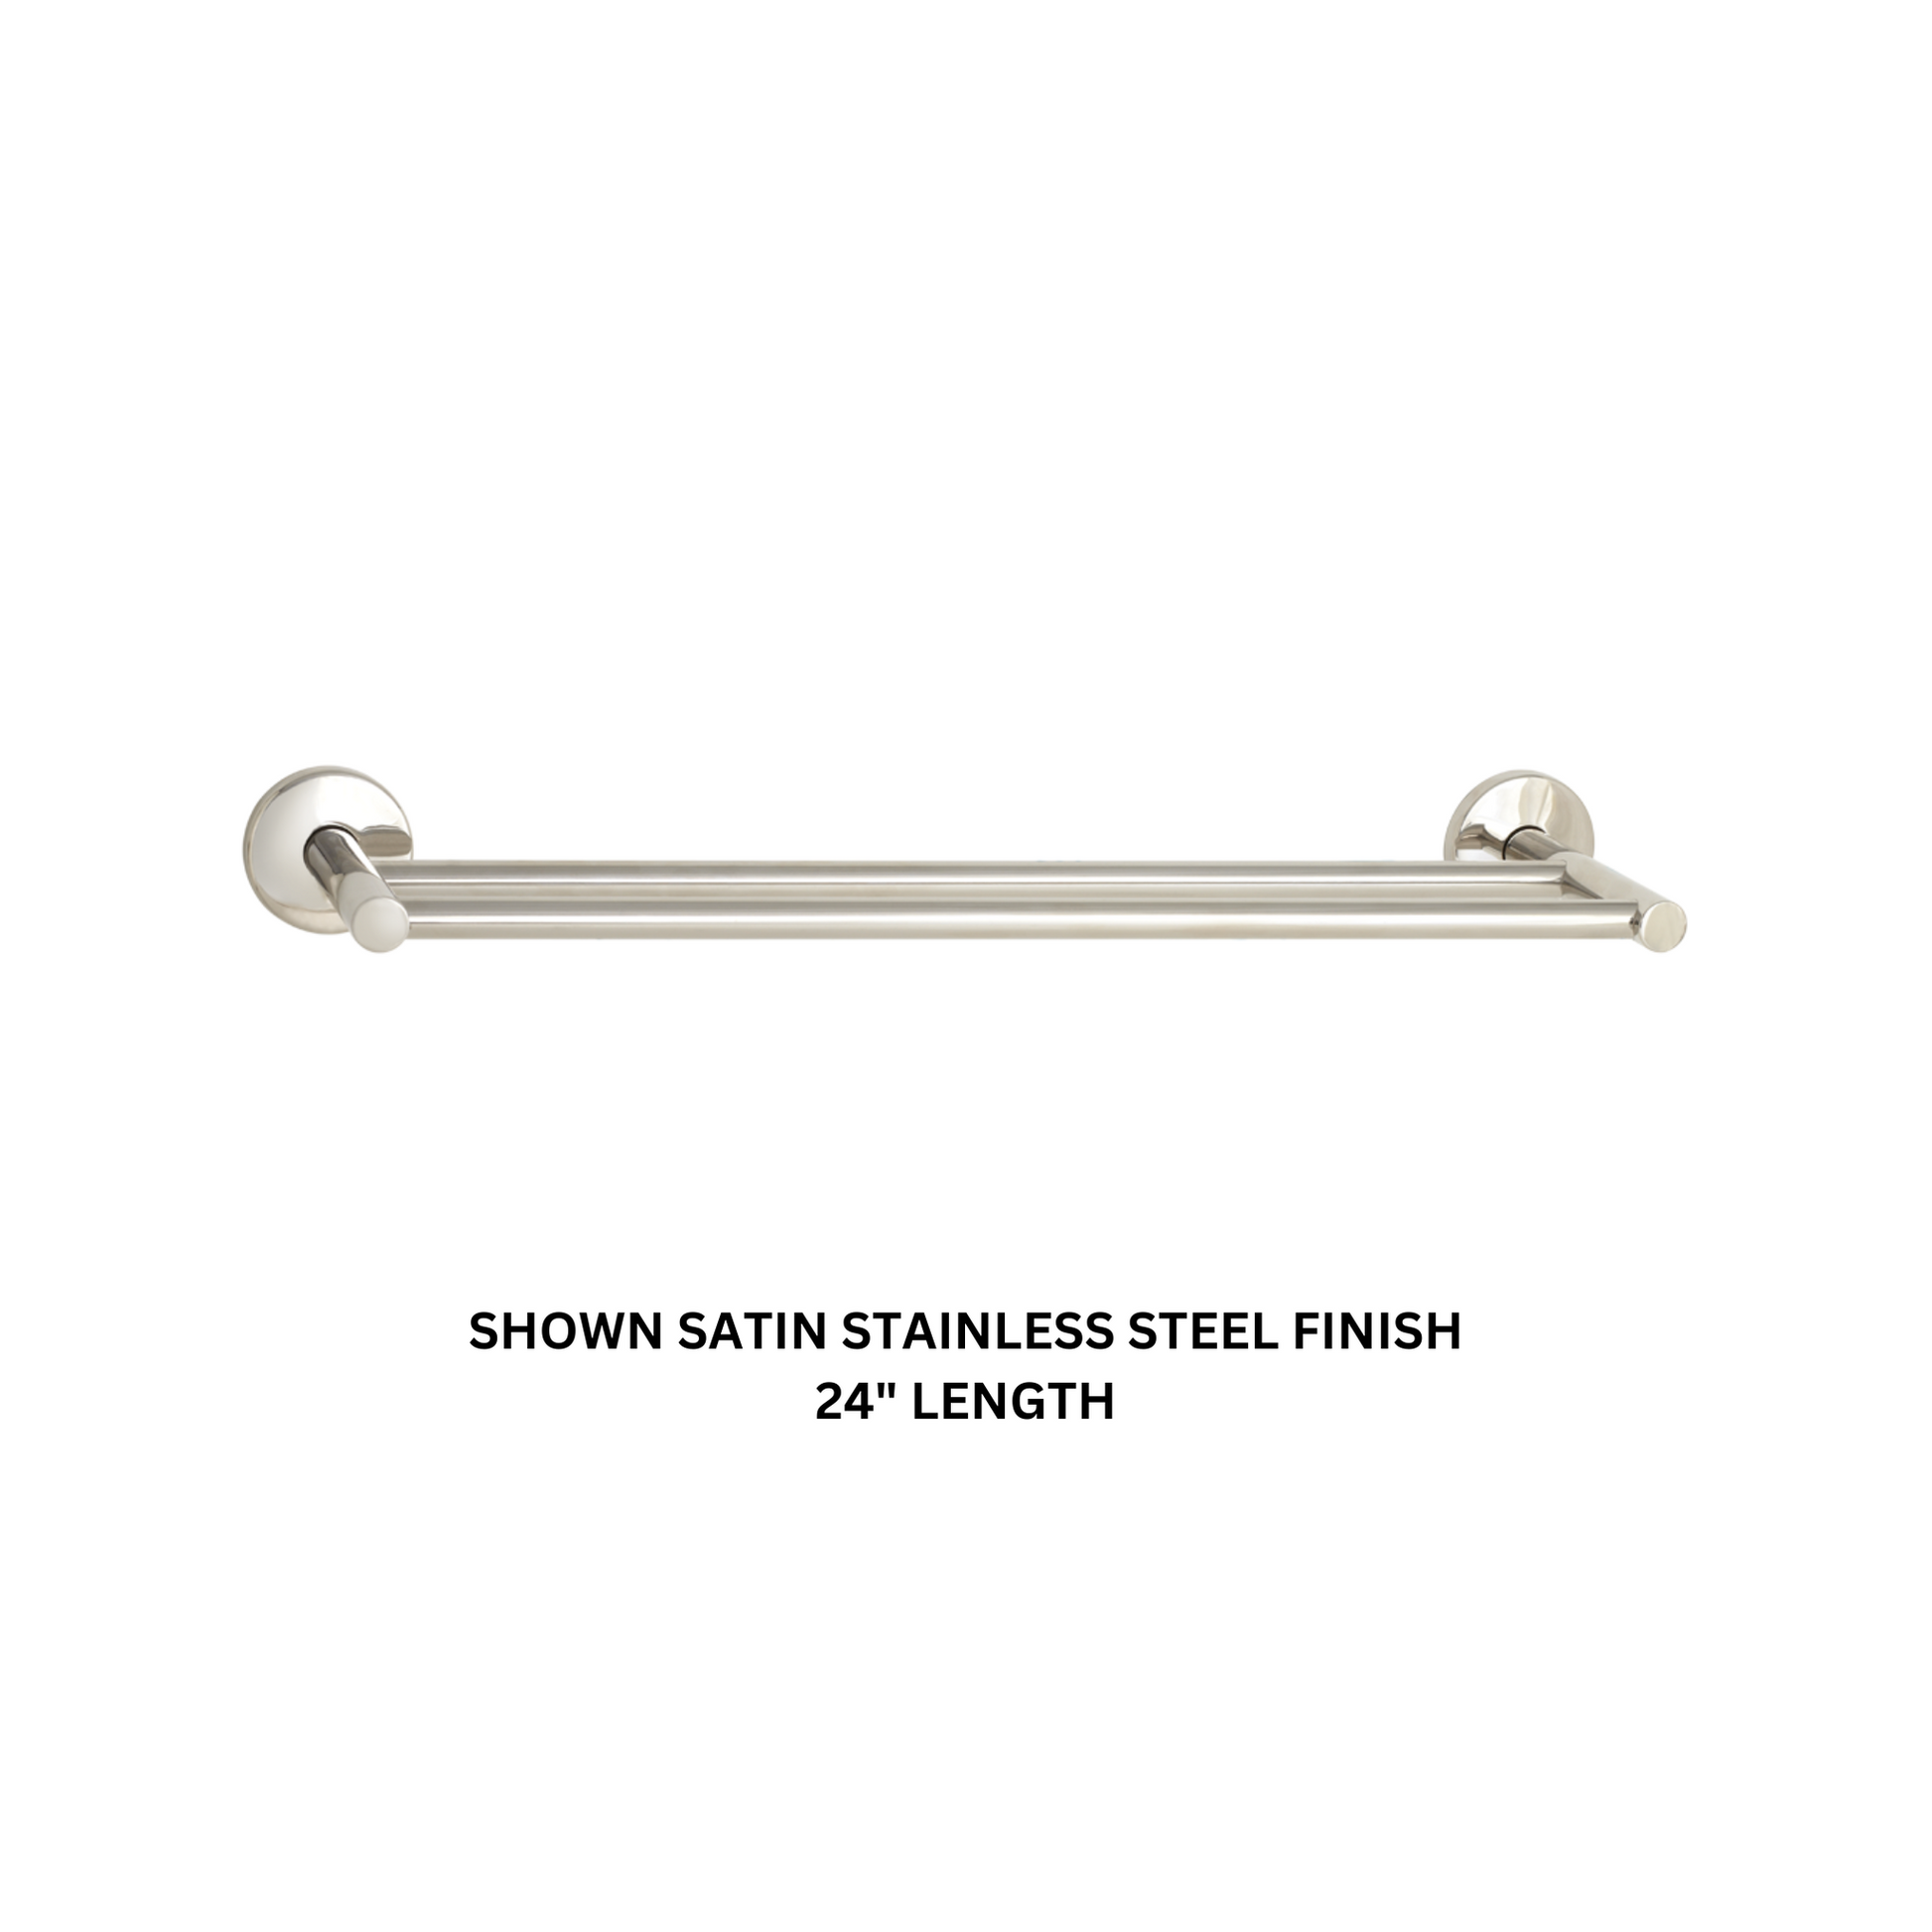 Seachrome Conorado Series 18" White Powder Coat Concealed Mounting Flange Double Towel Bar